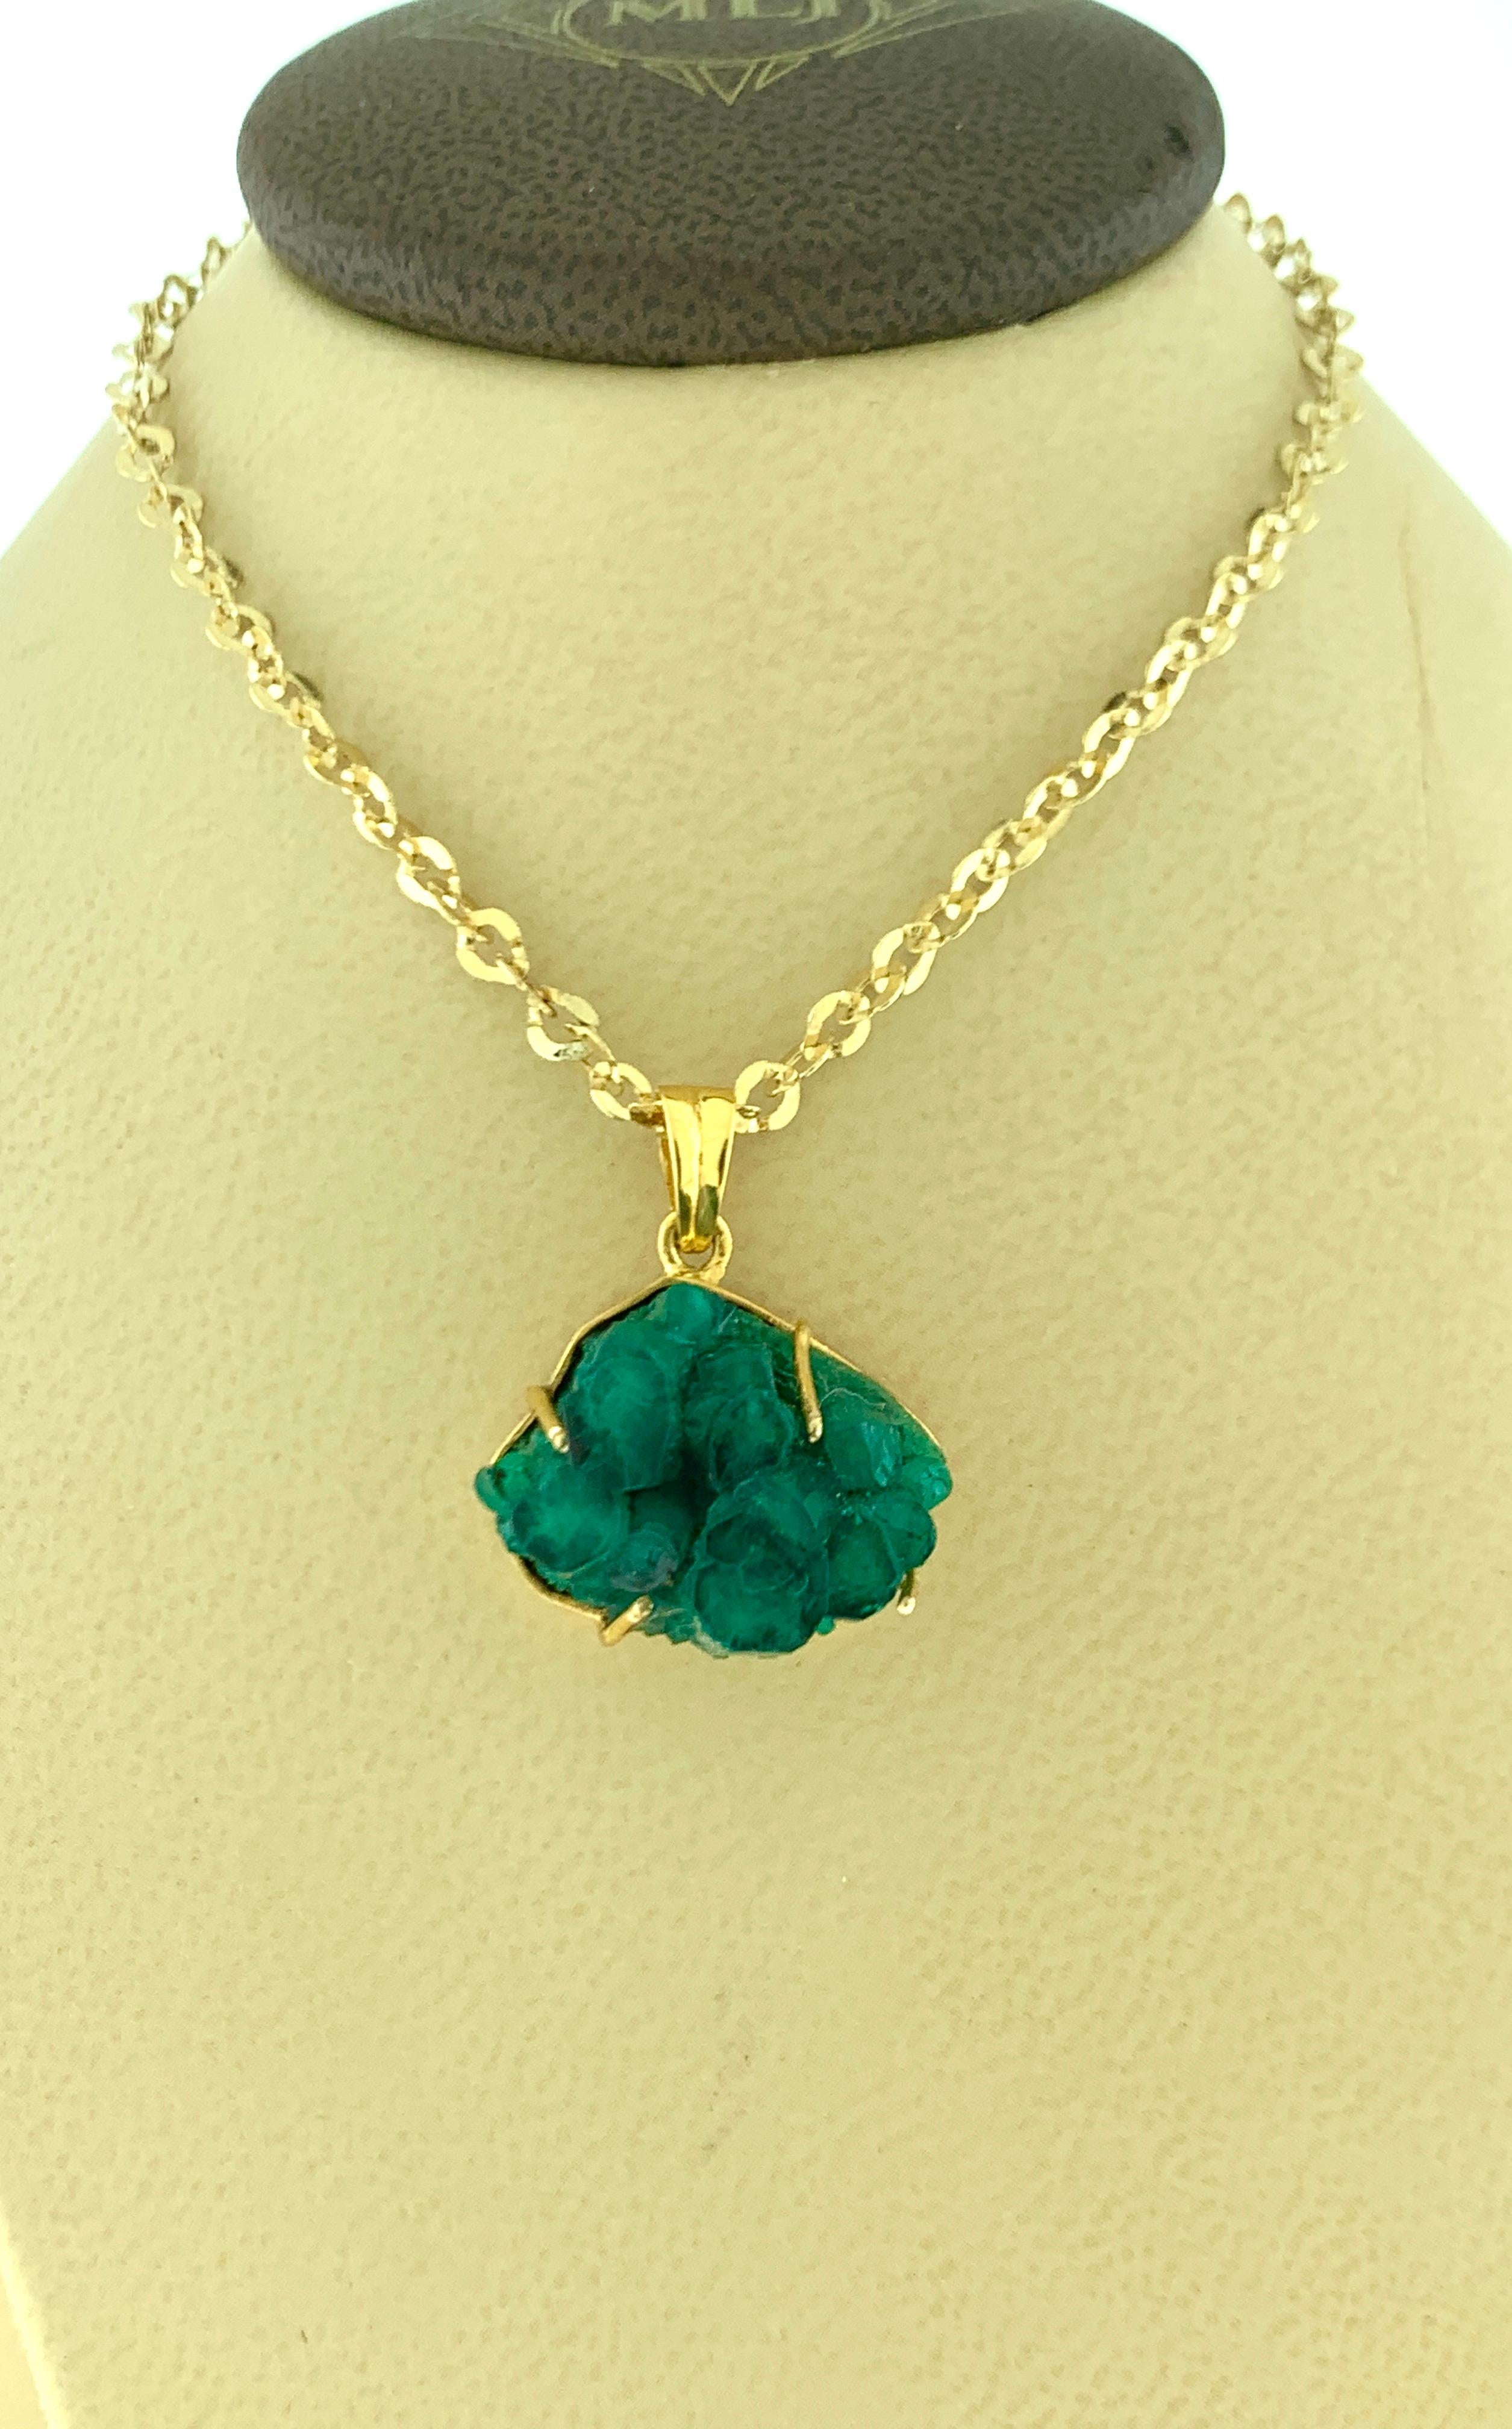 19 Carat Colombian Emerald Rough Pendent/Necklace 18 Karat Gold with Chain 1